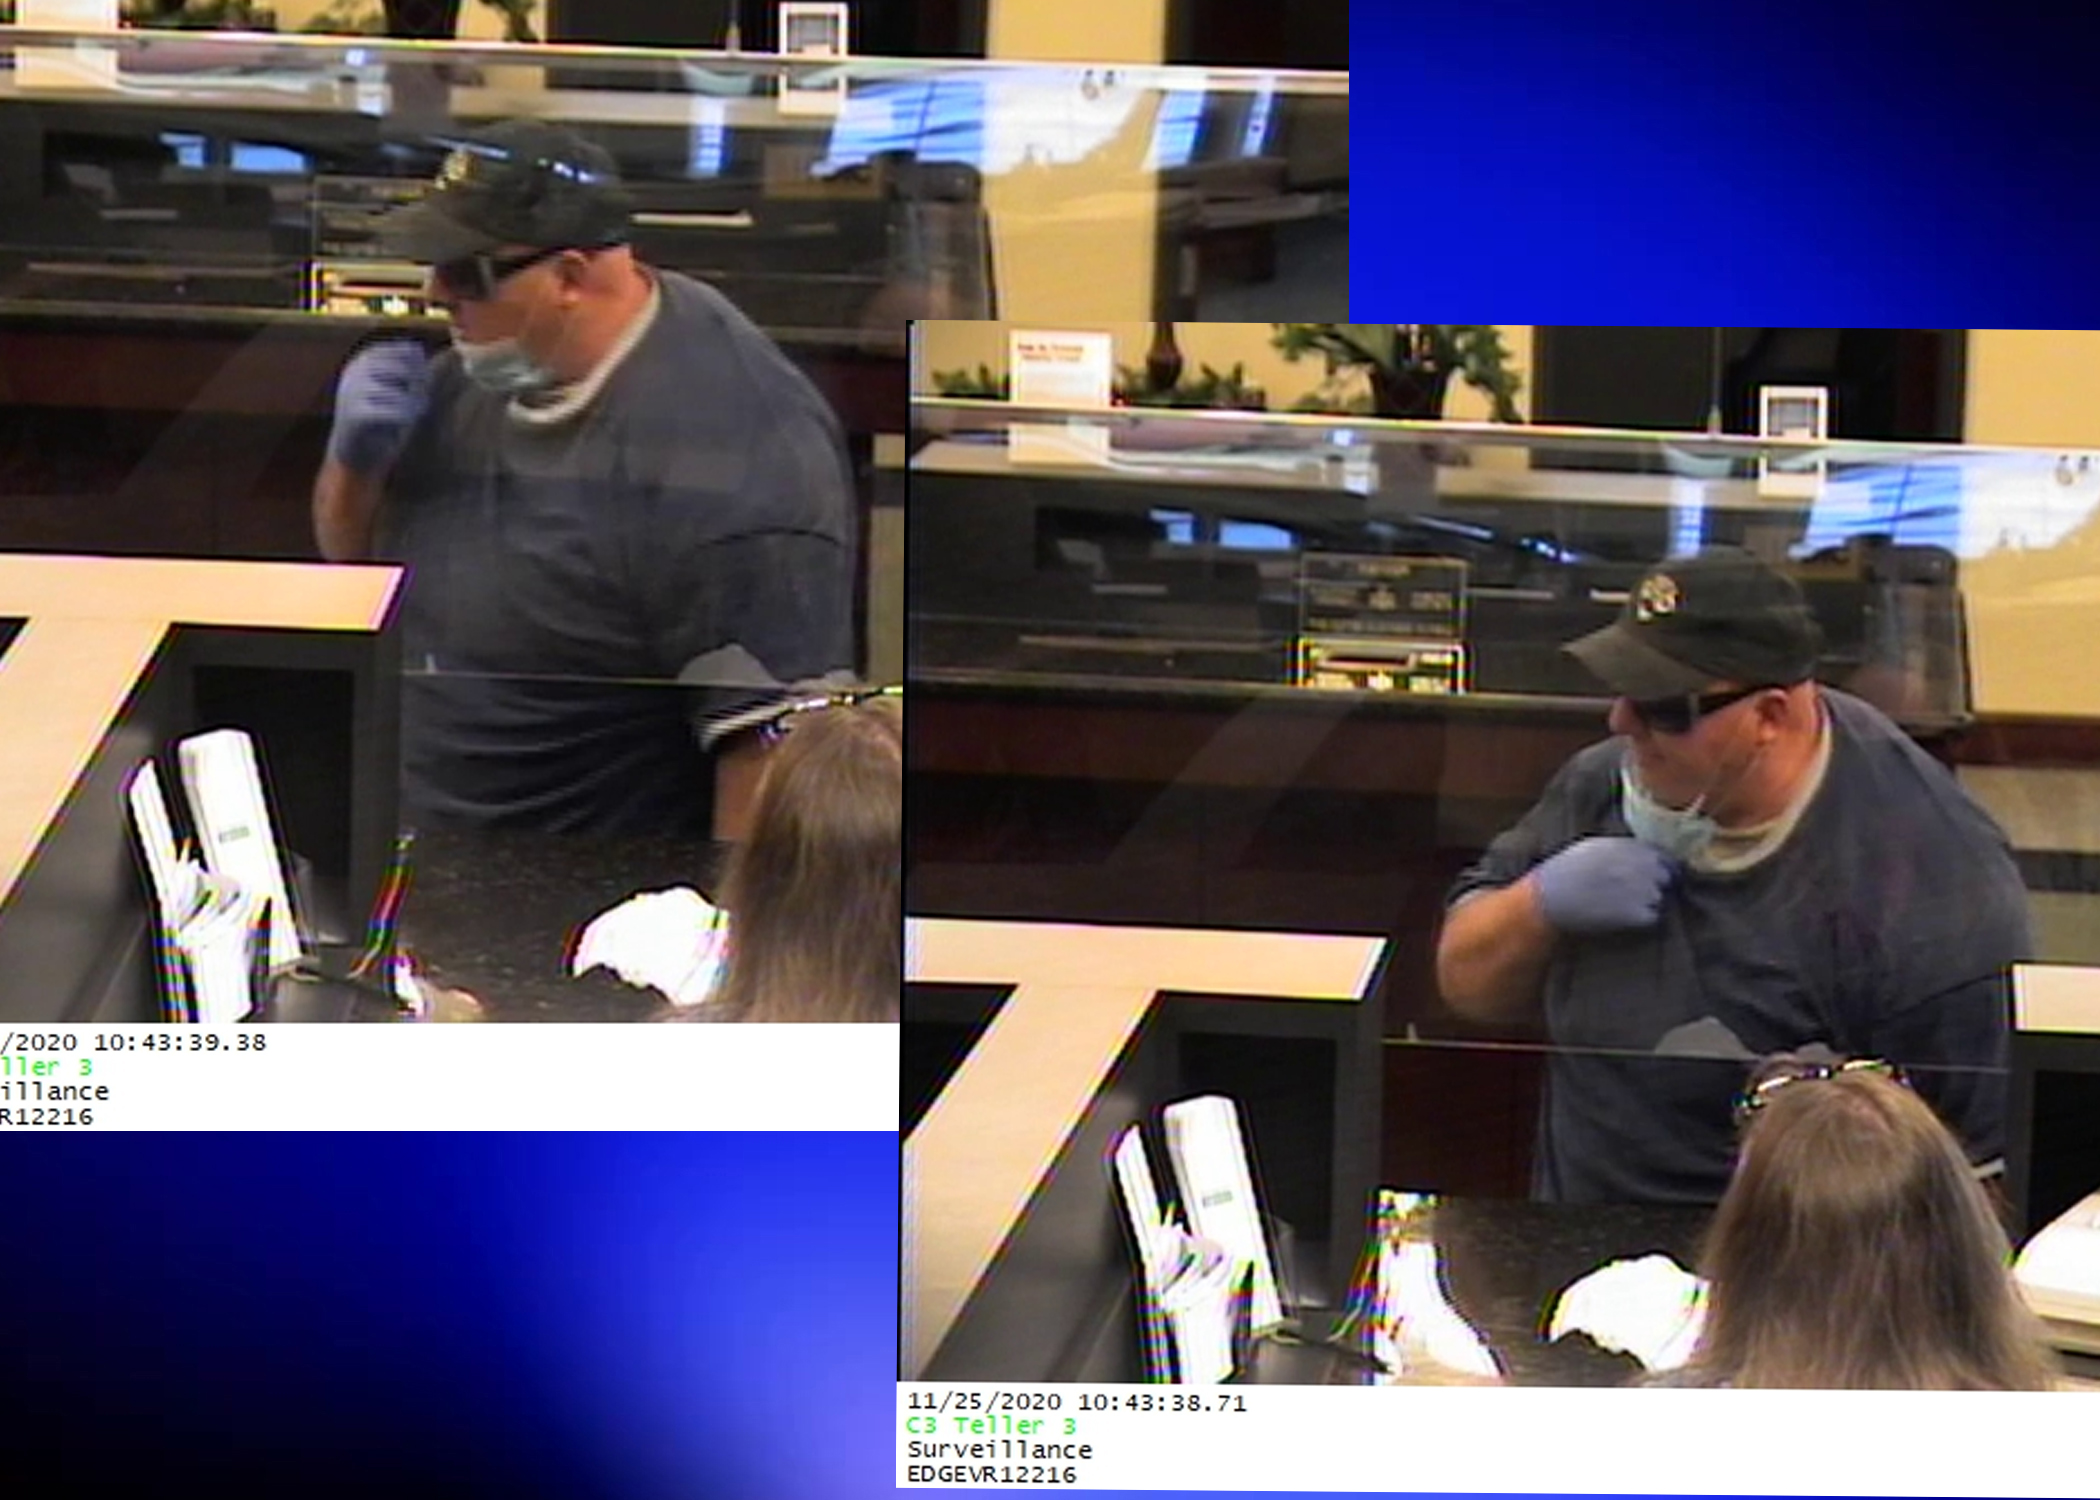 NEW TONIGHT: Trussville PD released images of bank robbery suspect without mask